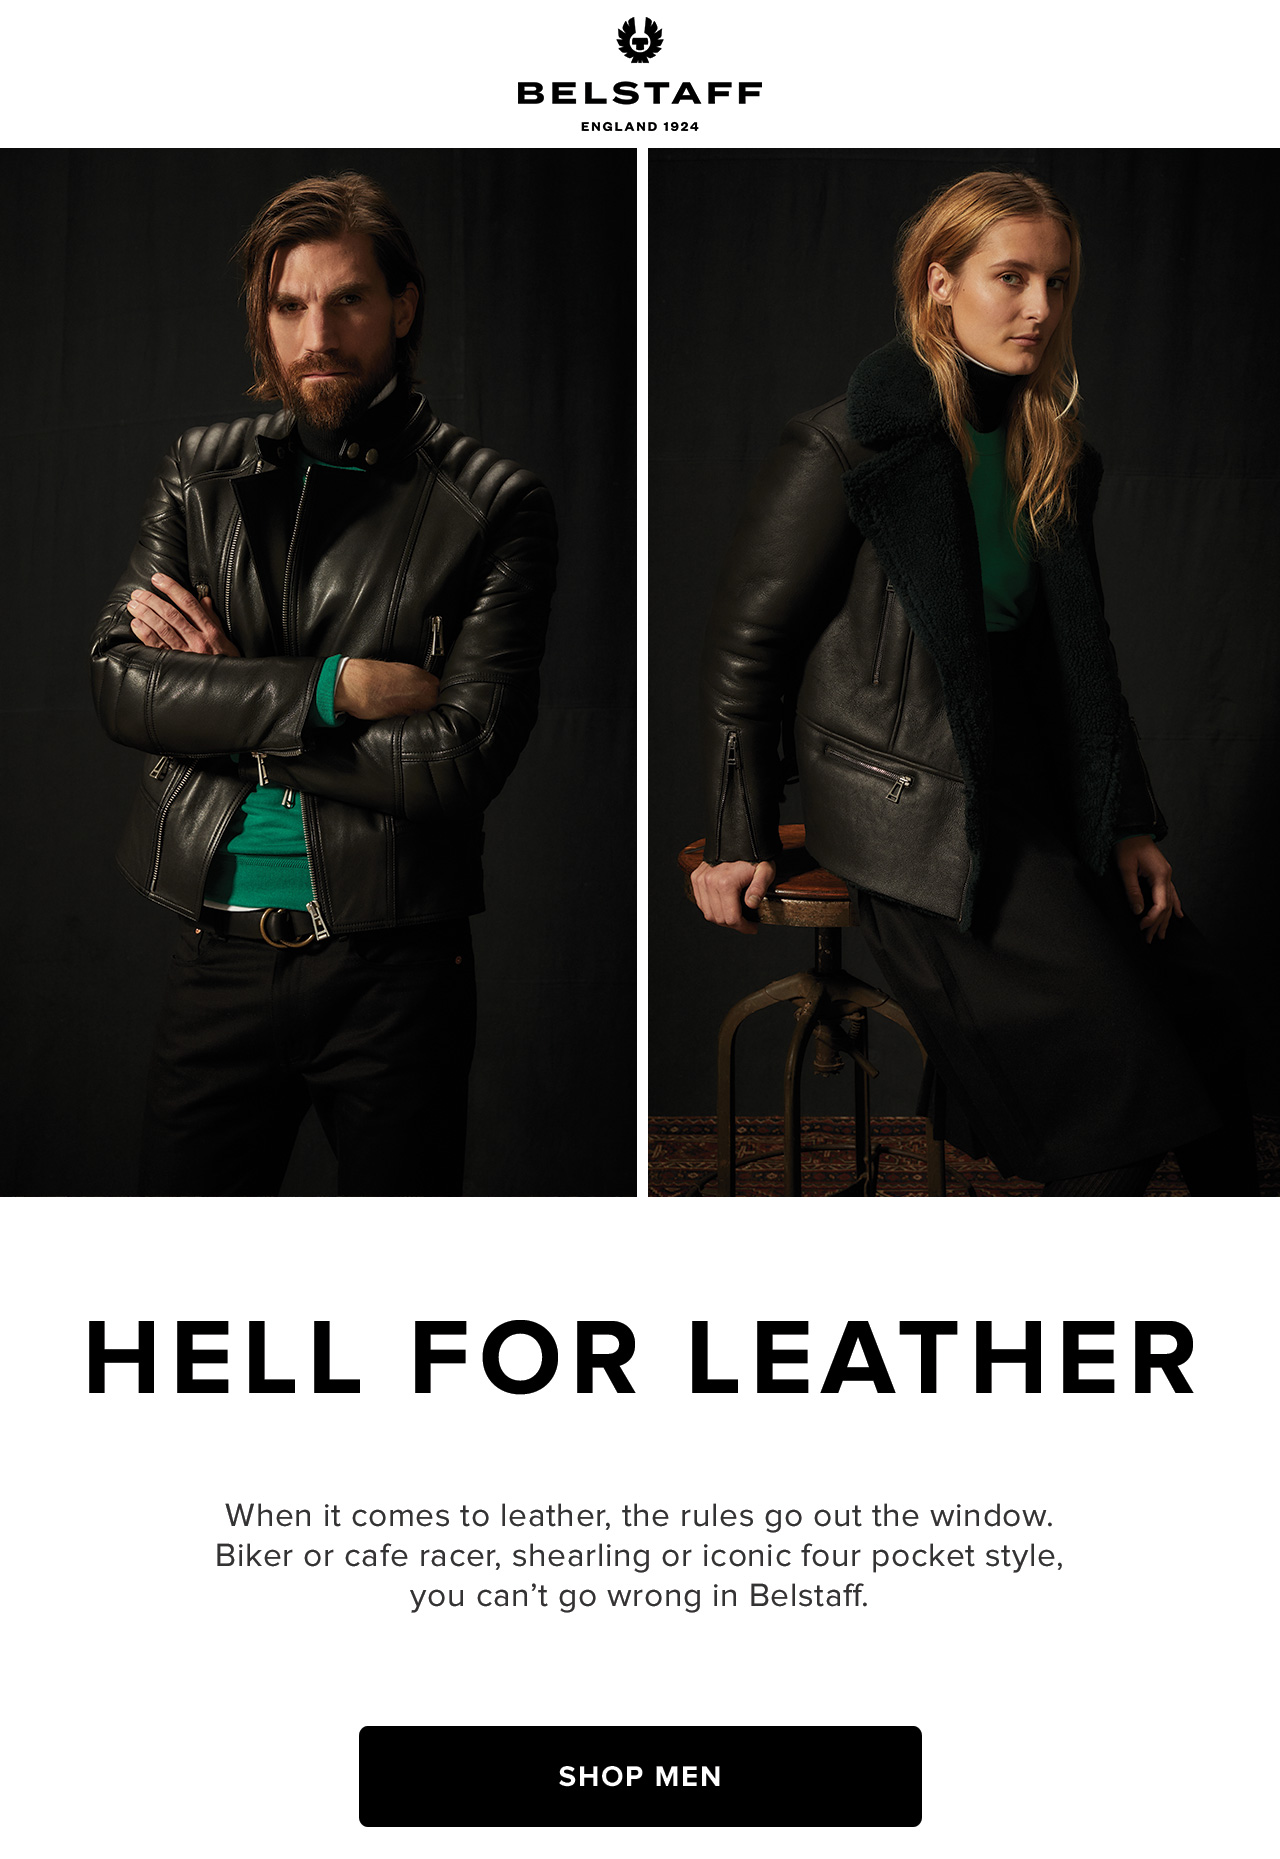 When it comes to leather, the rules go out the window. Biker or cafe racer, shearling or iconic four pocket style, you can't go wrong in Belstaff.